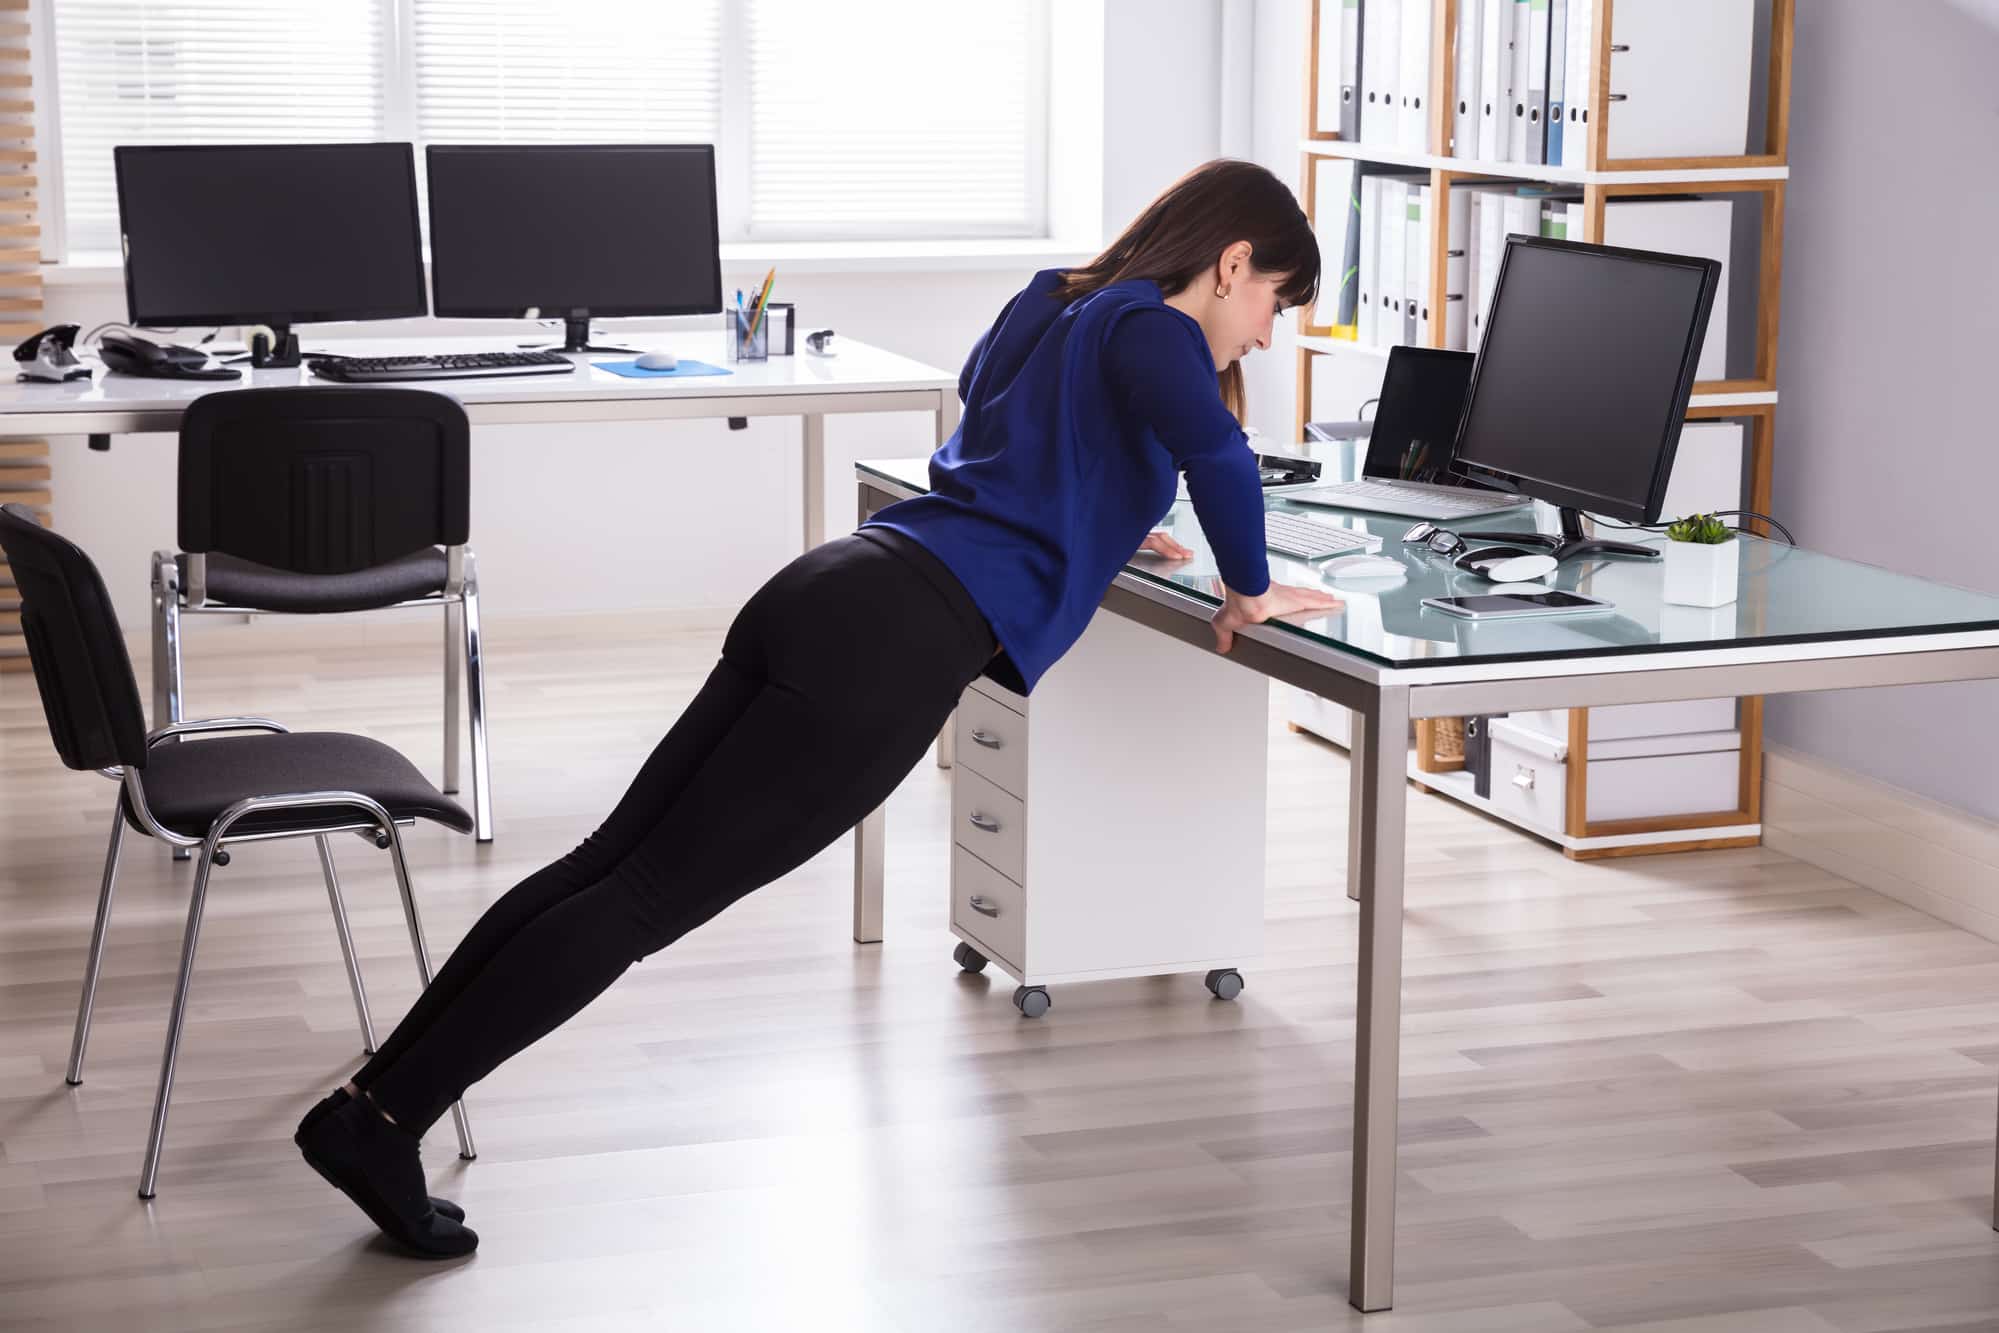 Exercises You Can Do At Your Desk